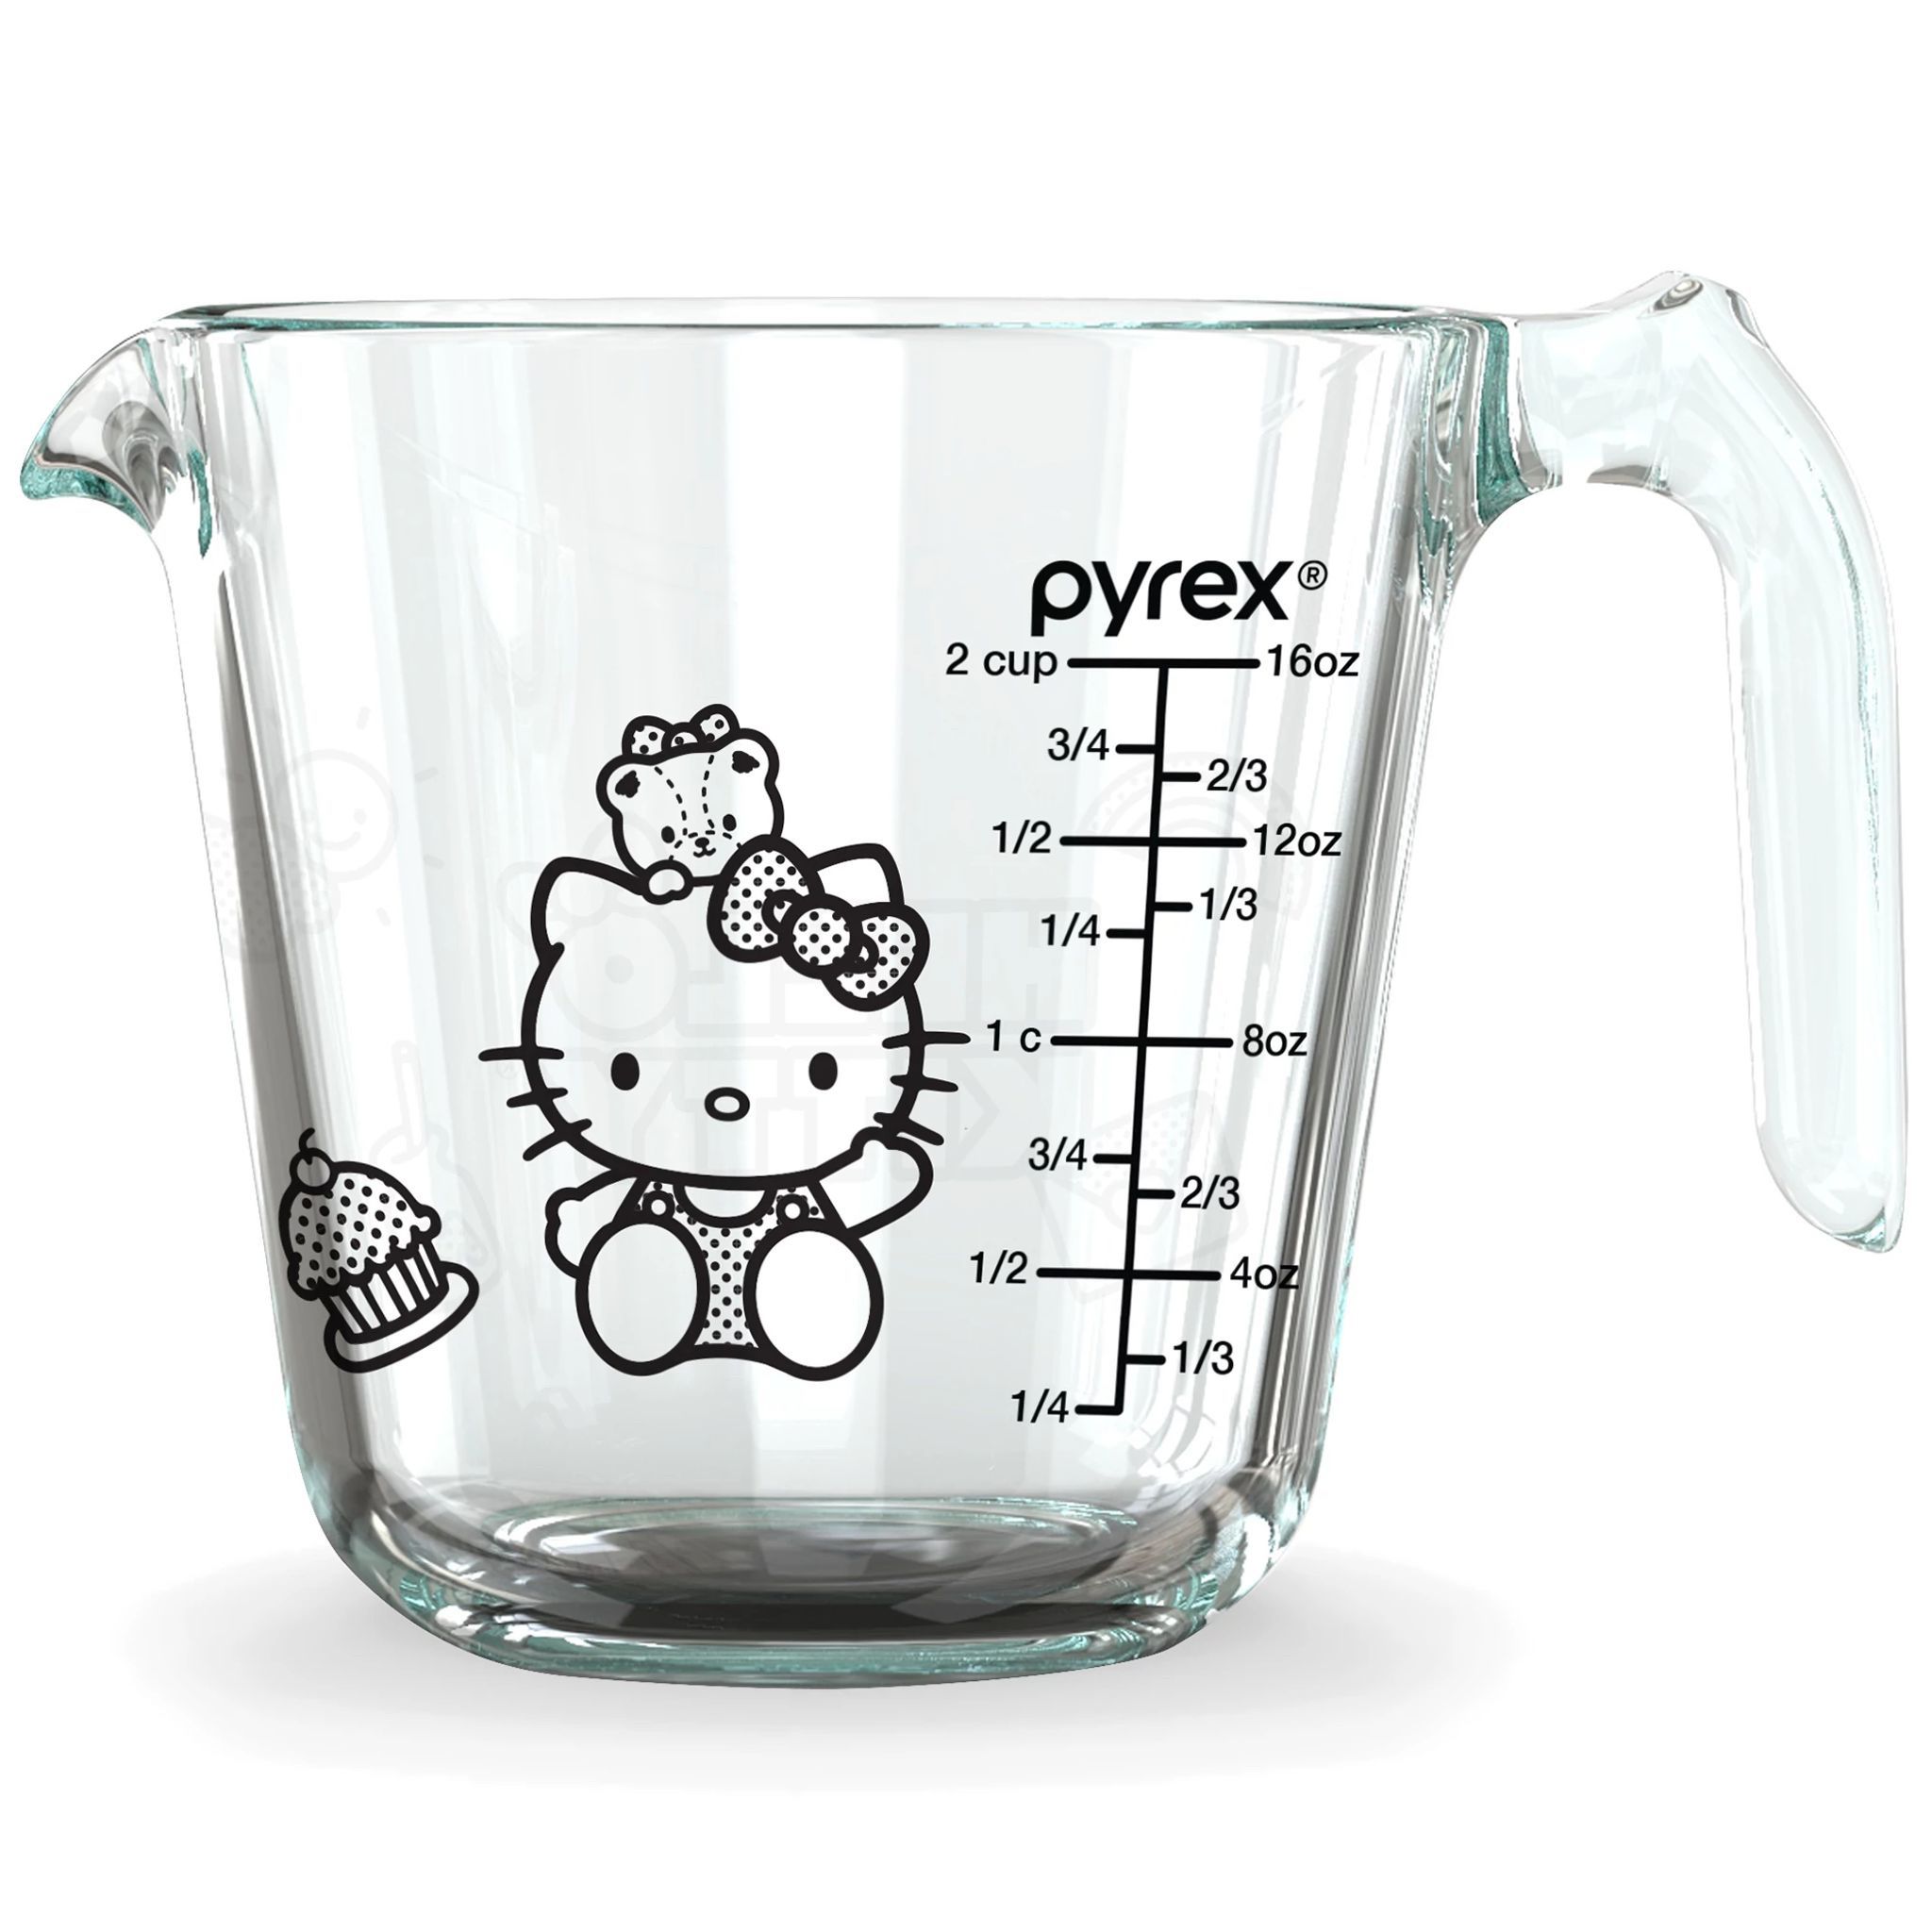 for Hello kitty Pyrex measuring cup - Measuring Cups & Spoons, Facebook  Marketplace